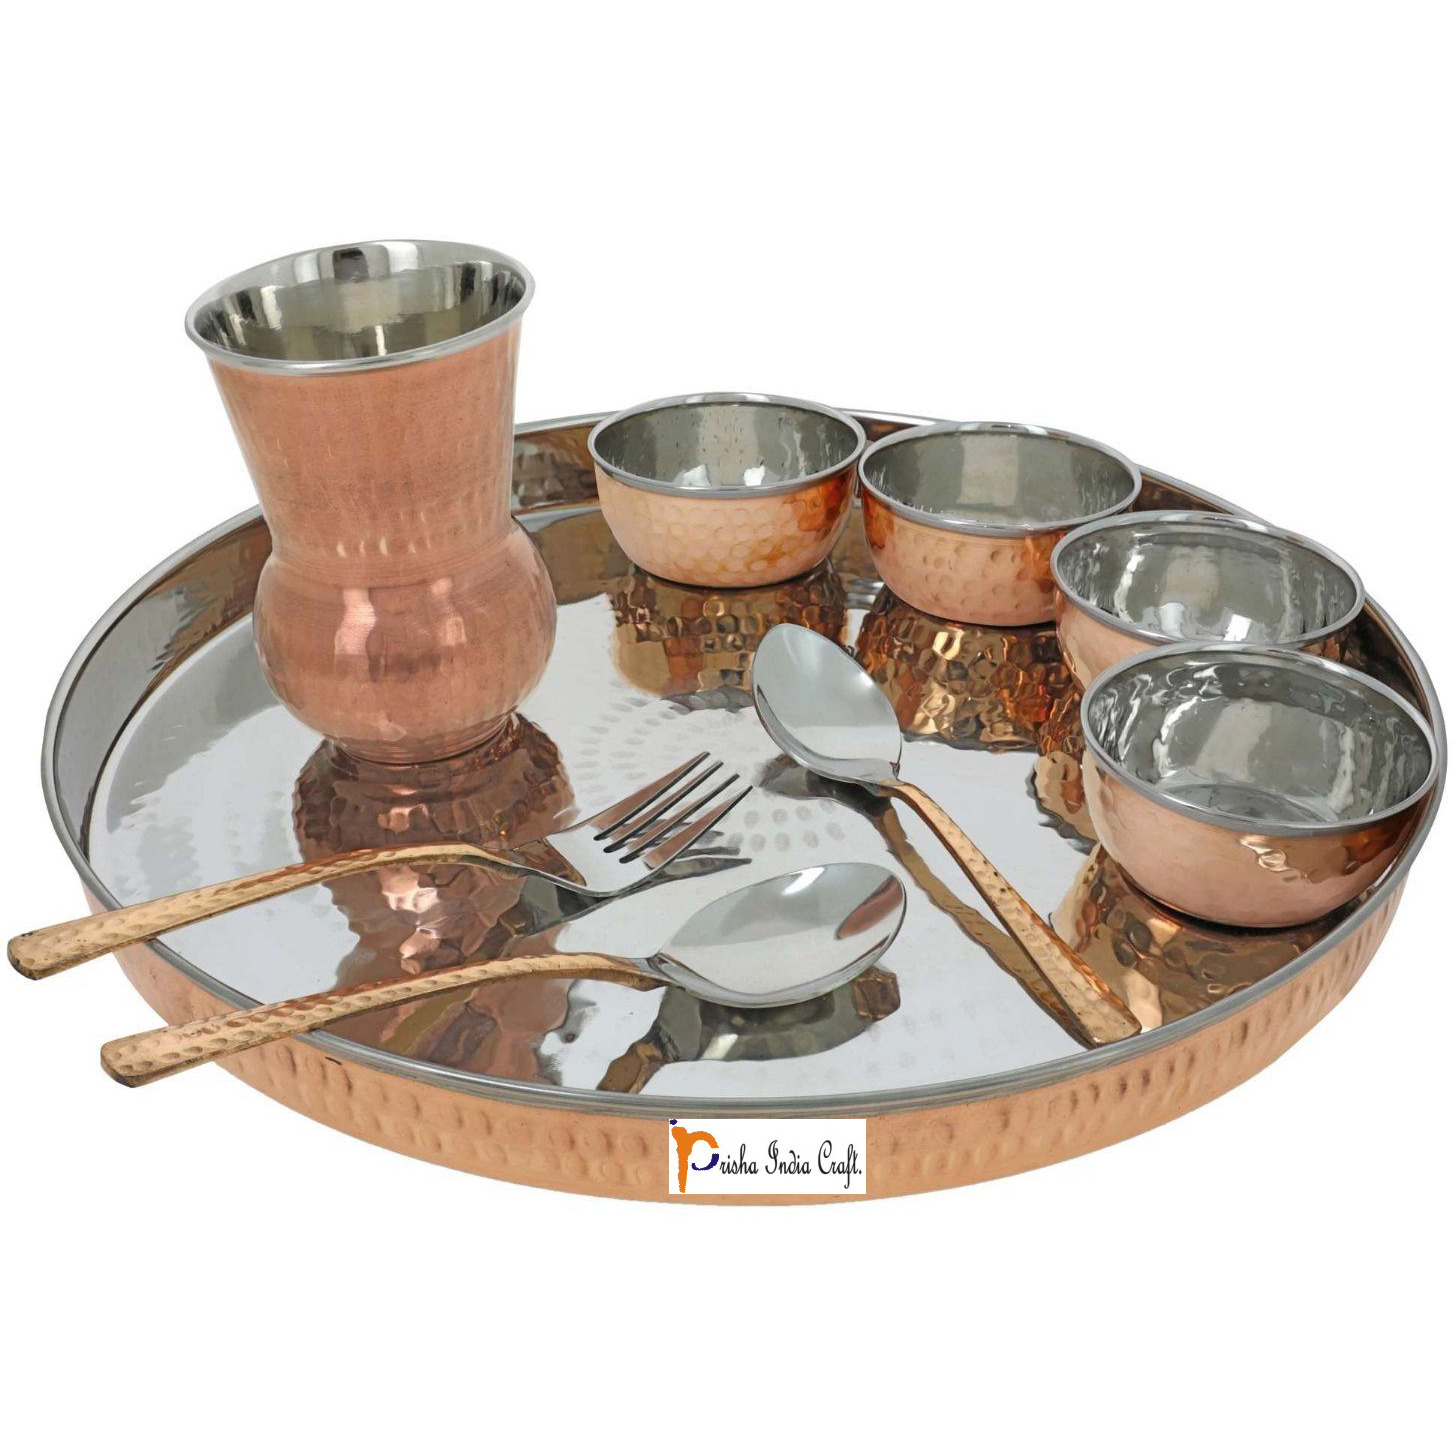 Prisha India Craft B. Set of 4 Dinnerware Traditional Stainless Steel Copper Dinner Set of Thali Plate, Bowls, Glass and Spoons, Dia 13  With 1 Pure Copper Classic Pitcher Jug - Christmas Gift